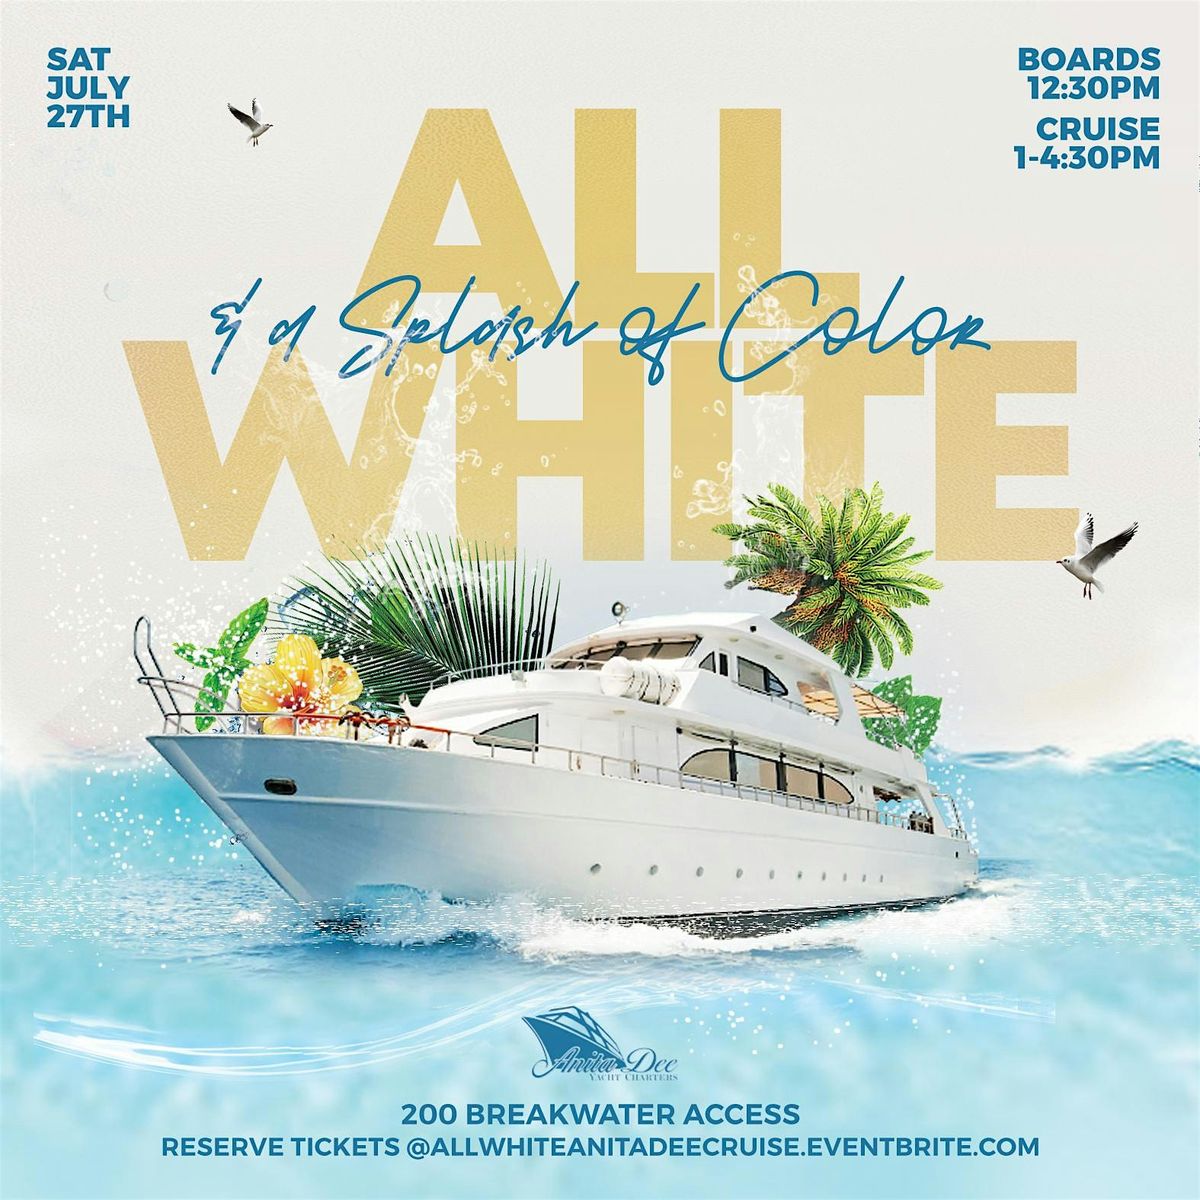 ALL WHITE WITH A SPLASH OF COLOR BOAT CRUISE